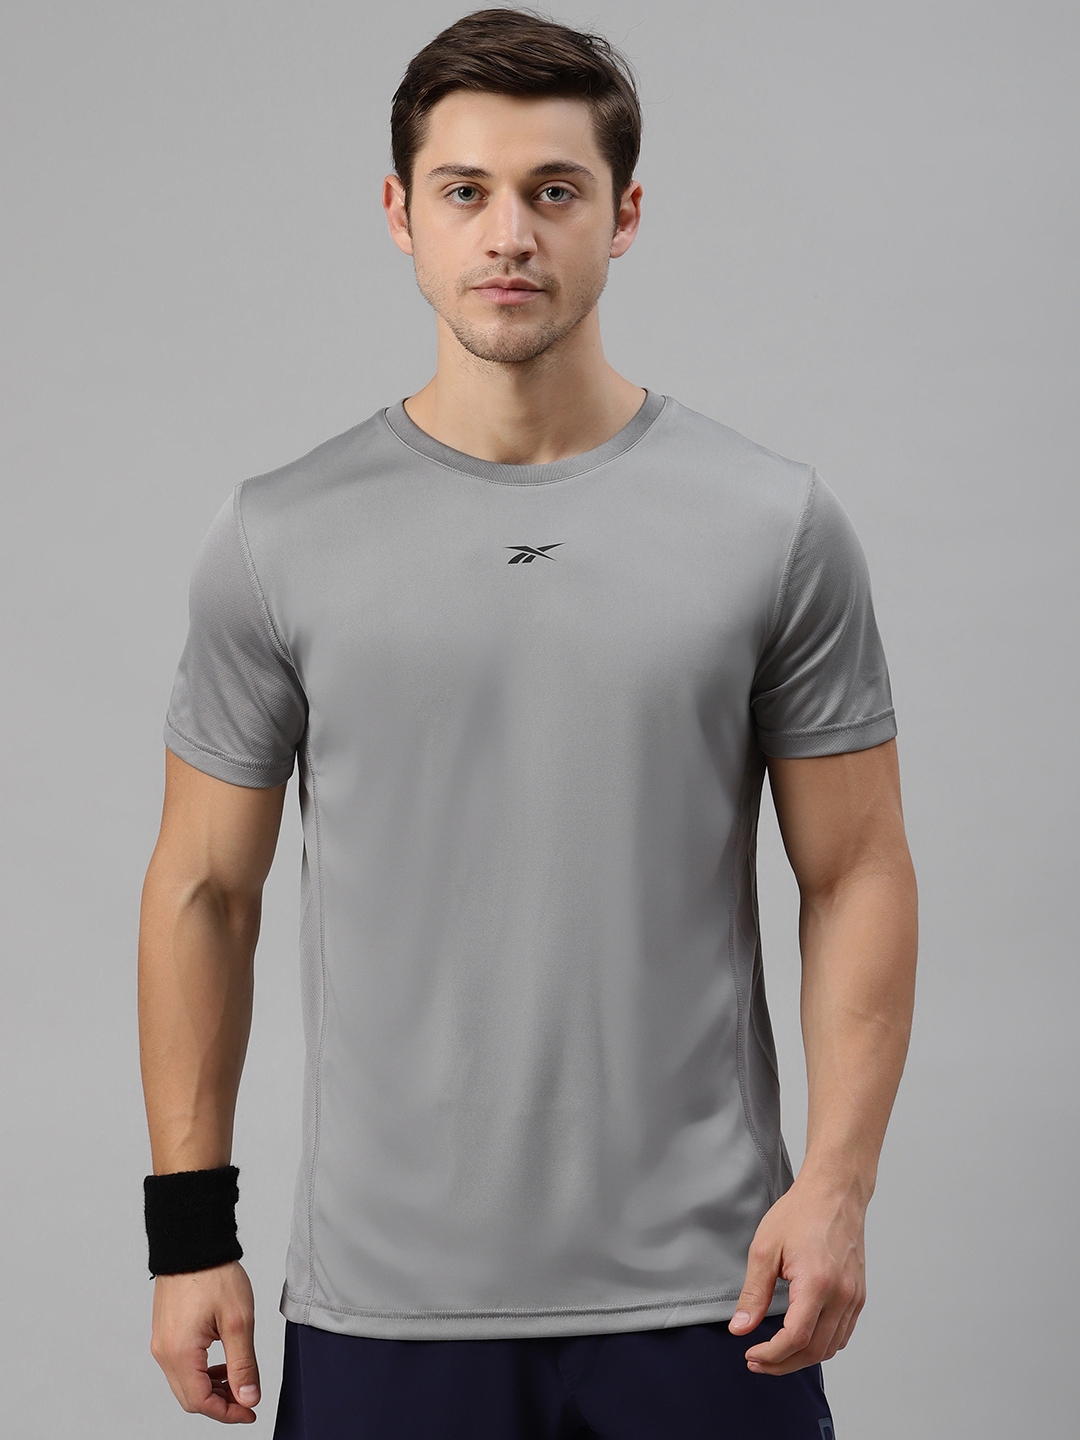 Buy Reebok Men Grey Solid Recycled Polyester Contrast Mod Poly Training ...